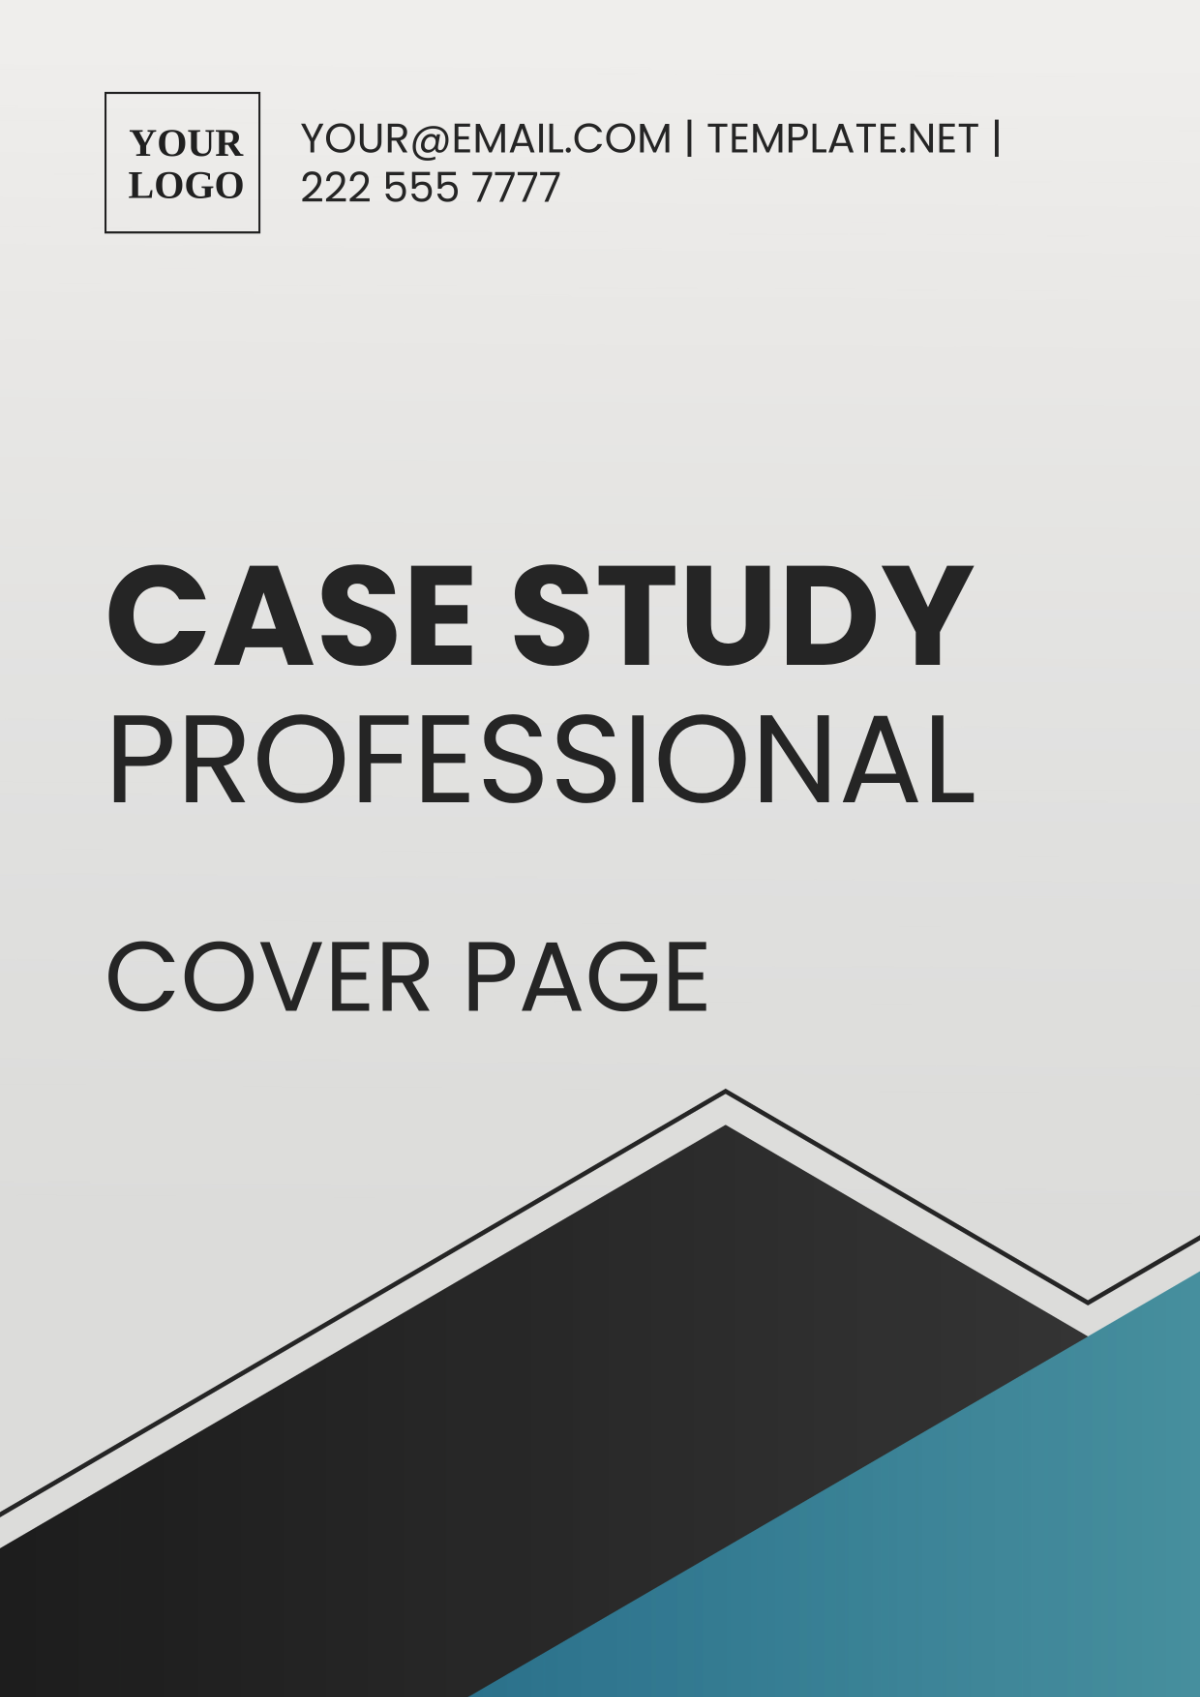 Case Study Professional Cover Page Template